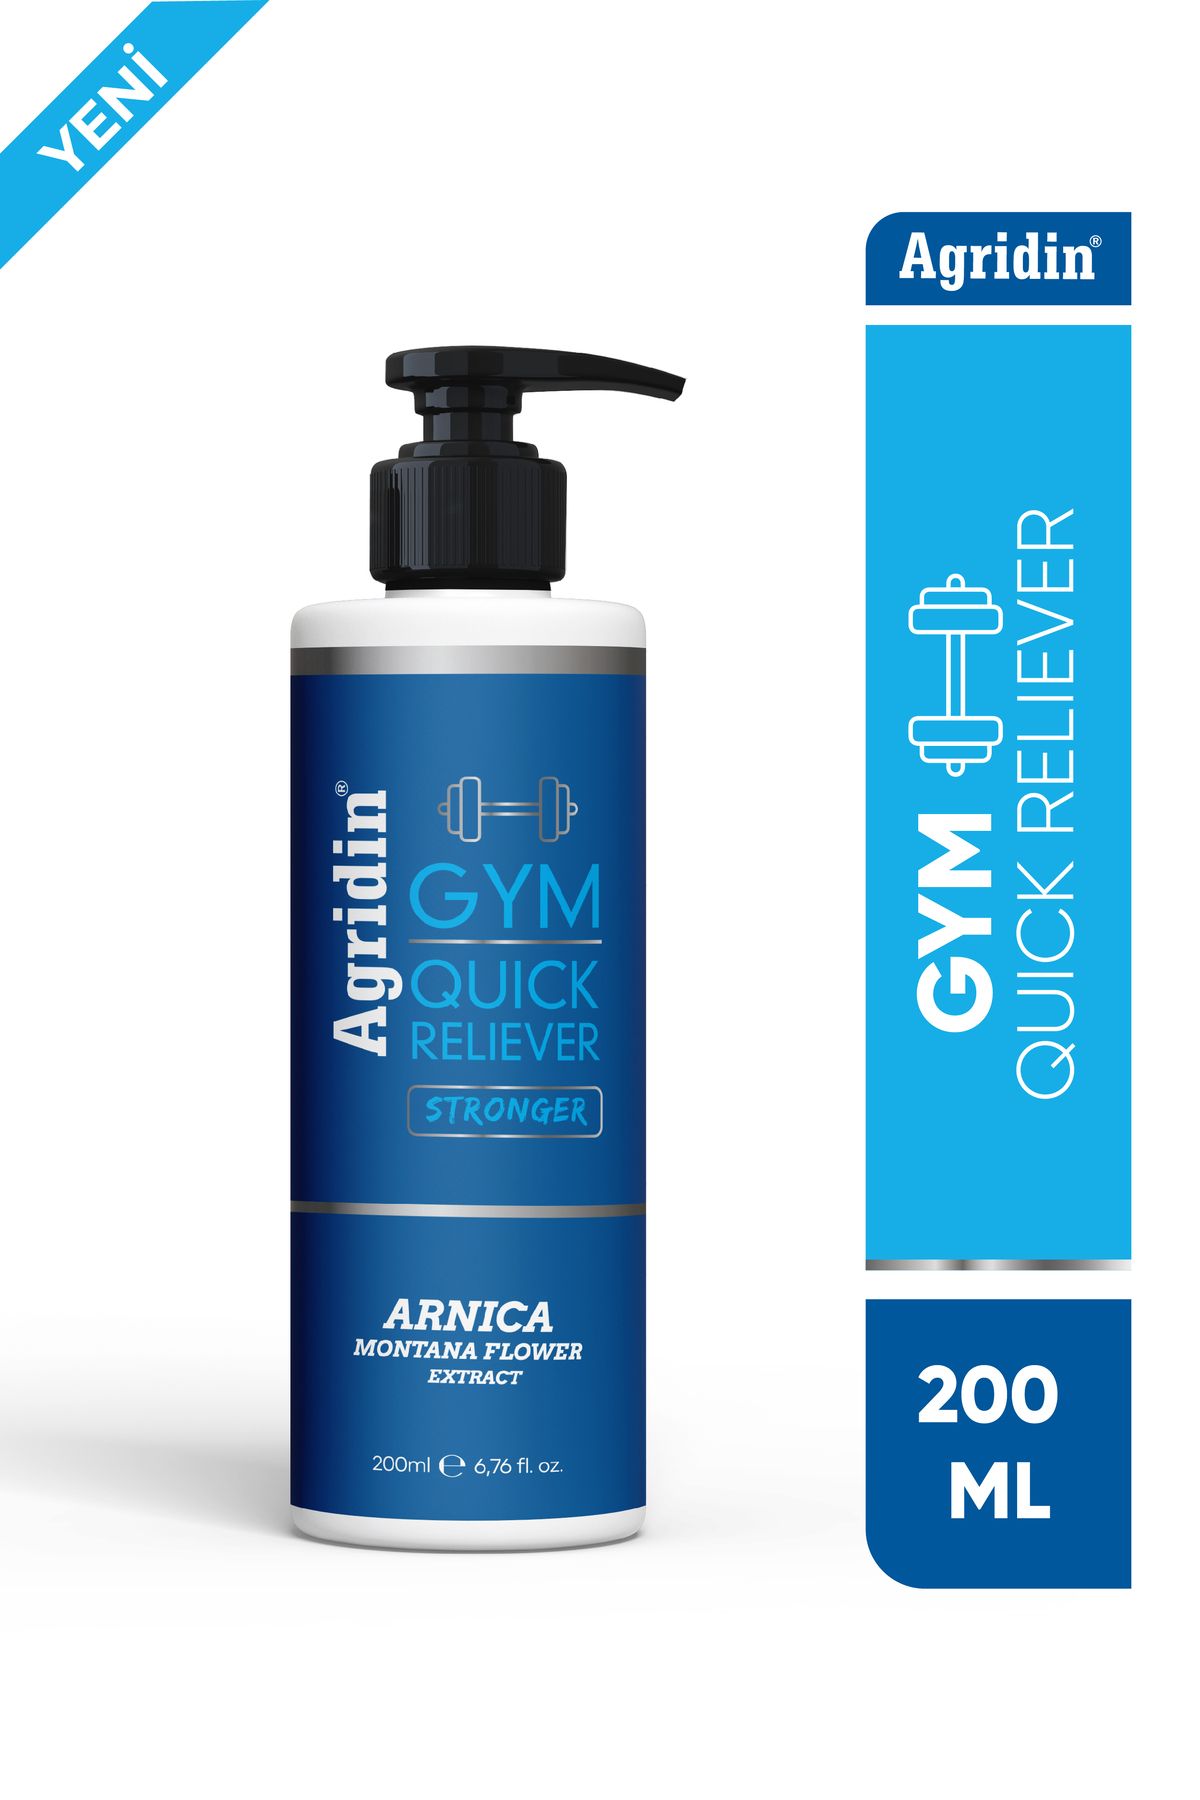 Agridin GYM Quick Reliever Cream (Stronger) 200 ML